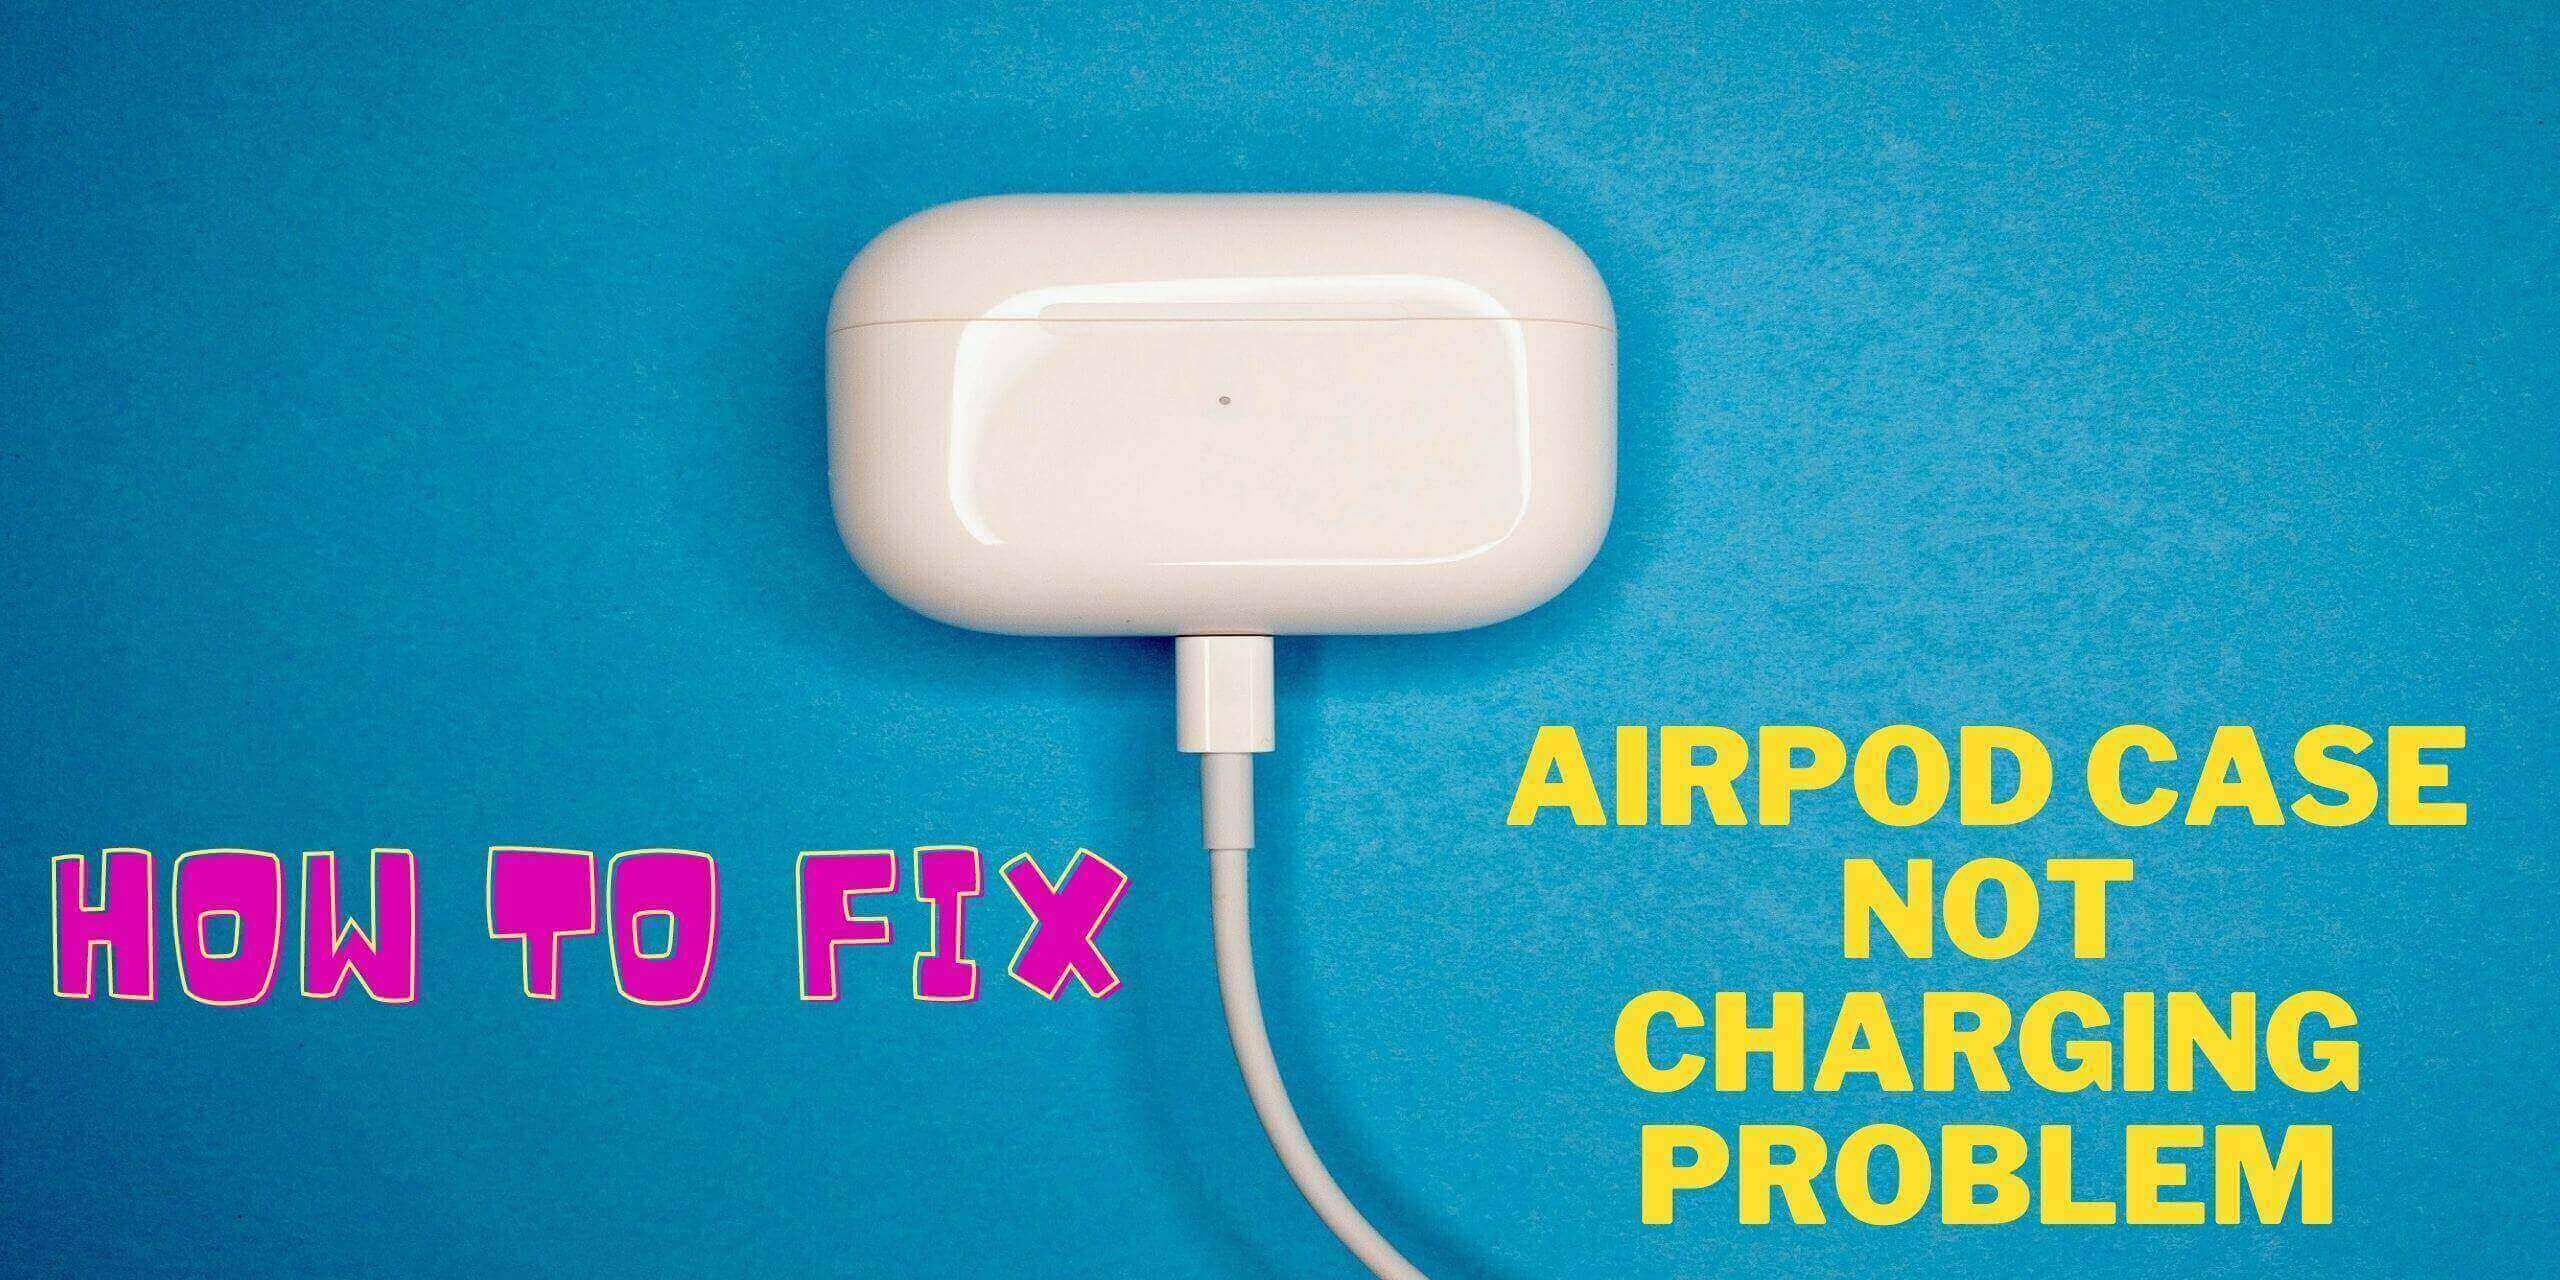 airpod case not charging